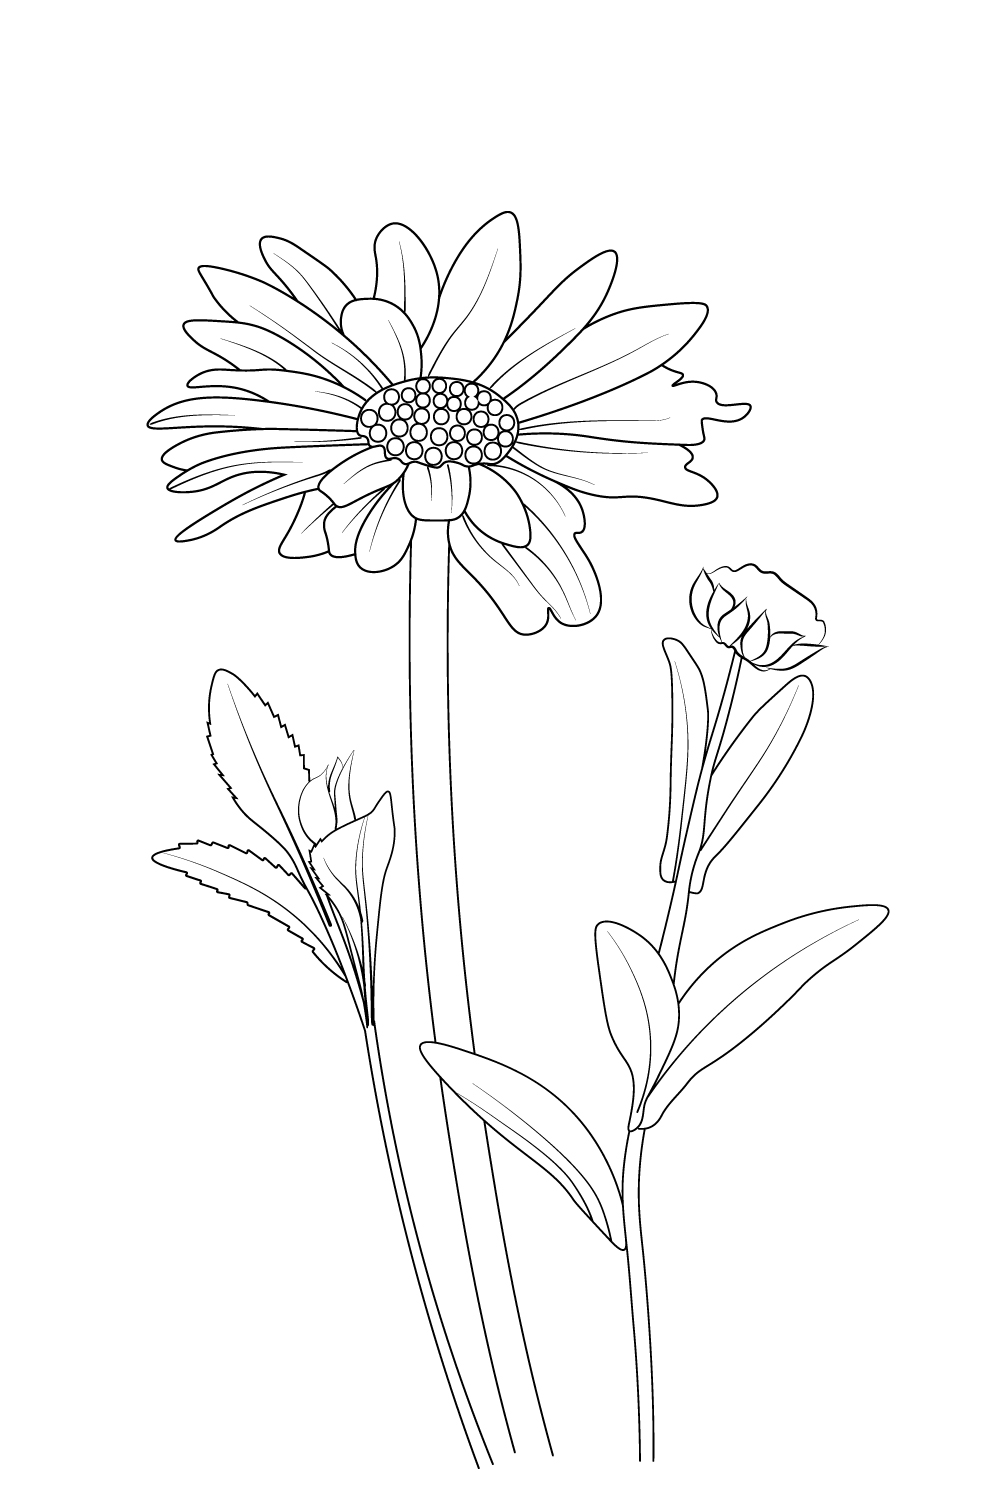 Flower Drawings - Spring 2019 — Katrina Crouch | Blushed Design